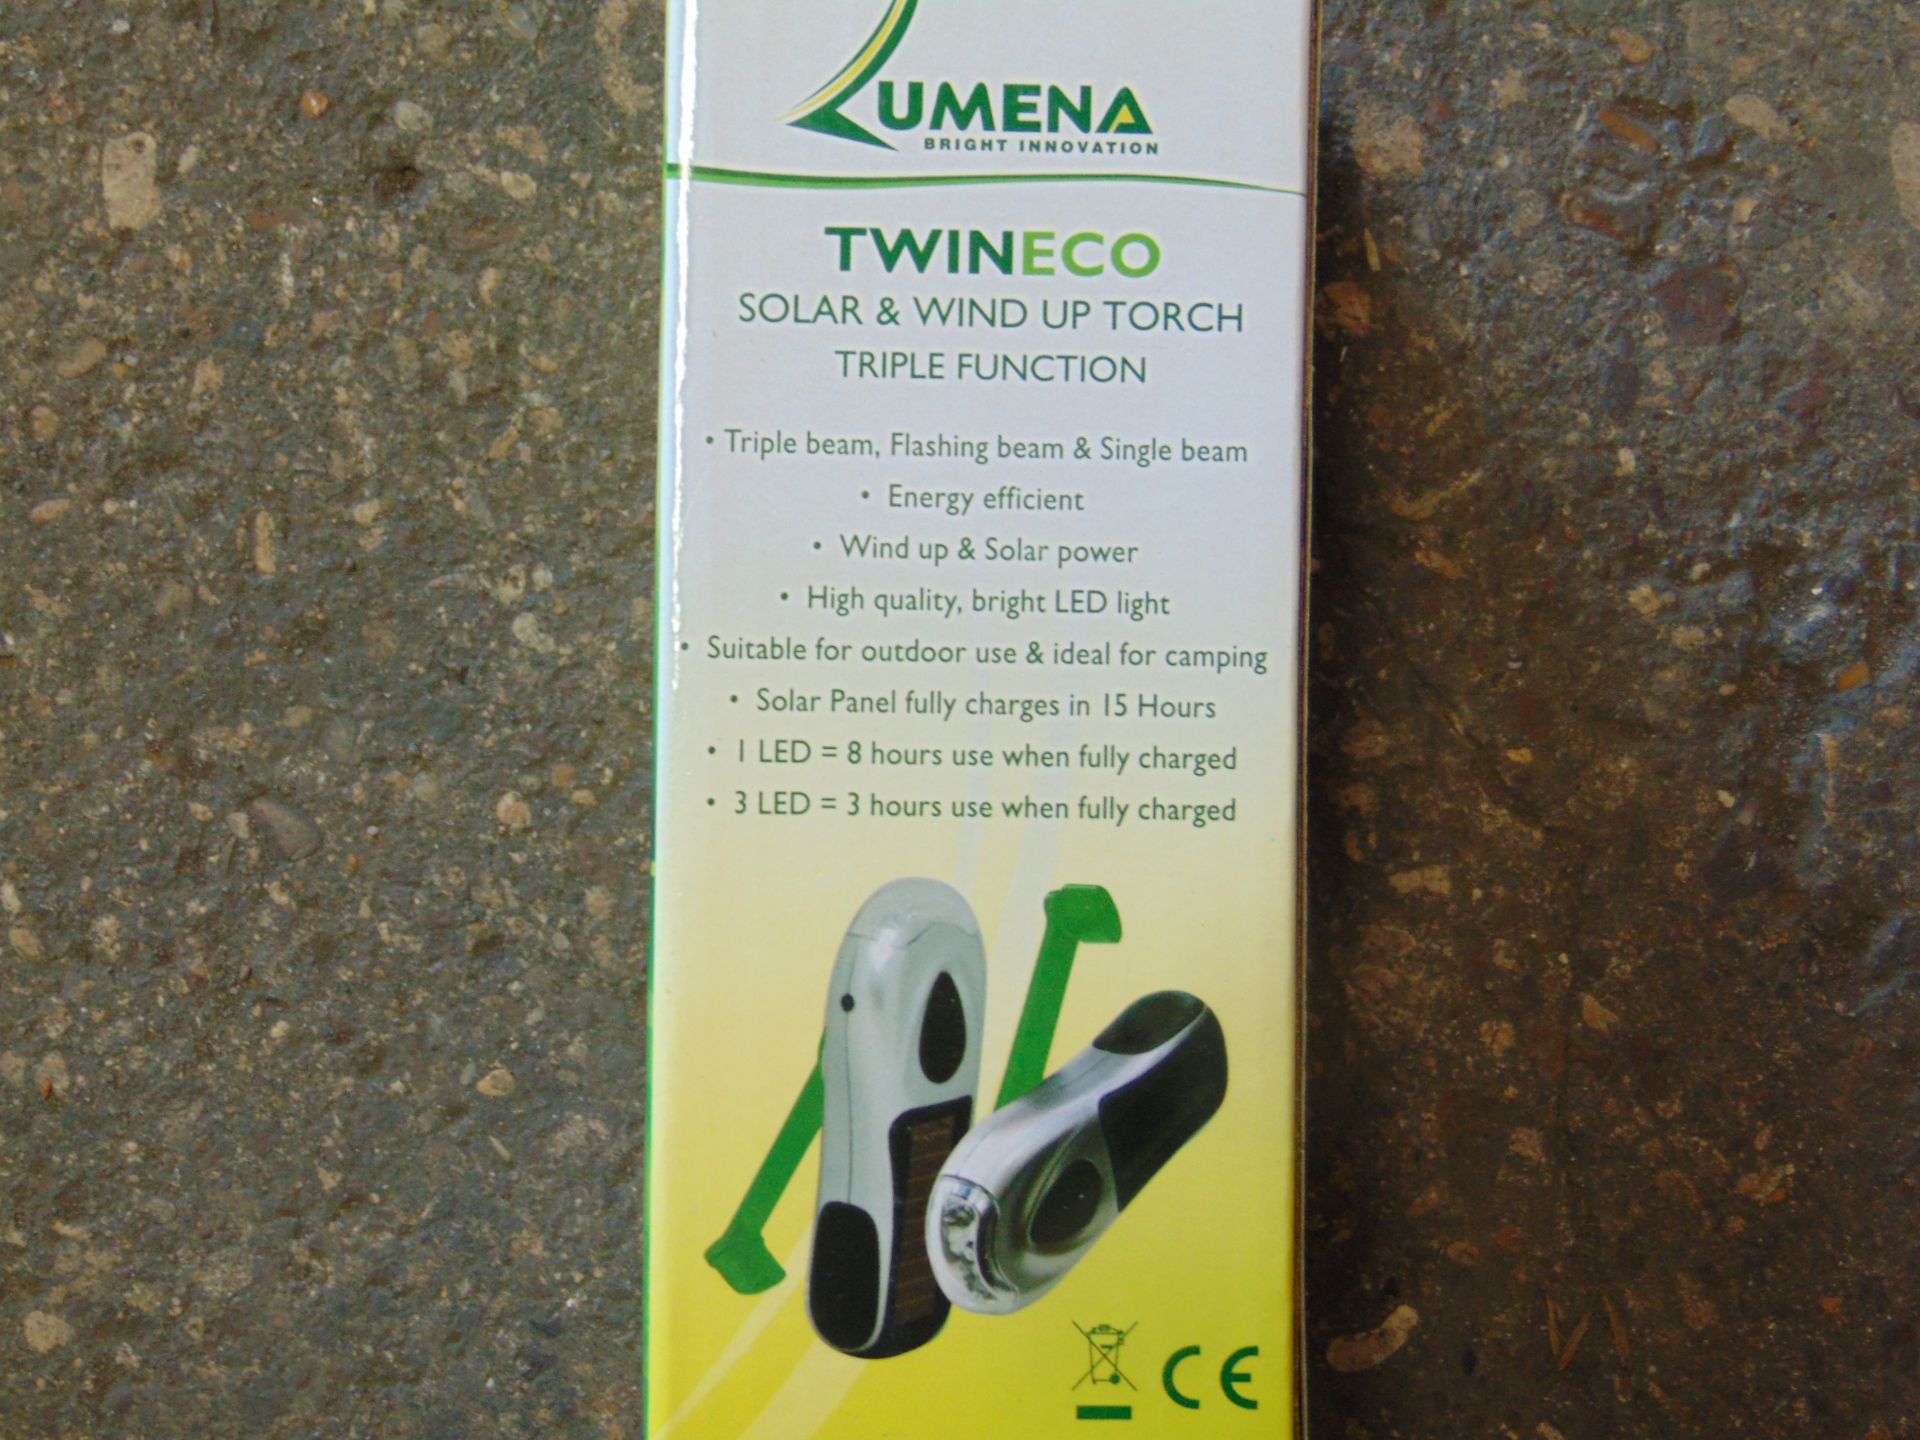 10X LUMENA TWINECO SOLAR AND WIND UP TRIPLE FUNCTION TORCH UNISSUED - Image 5 of 5